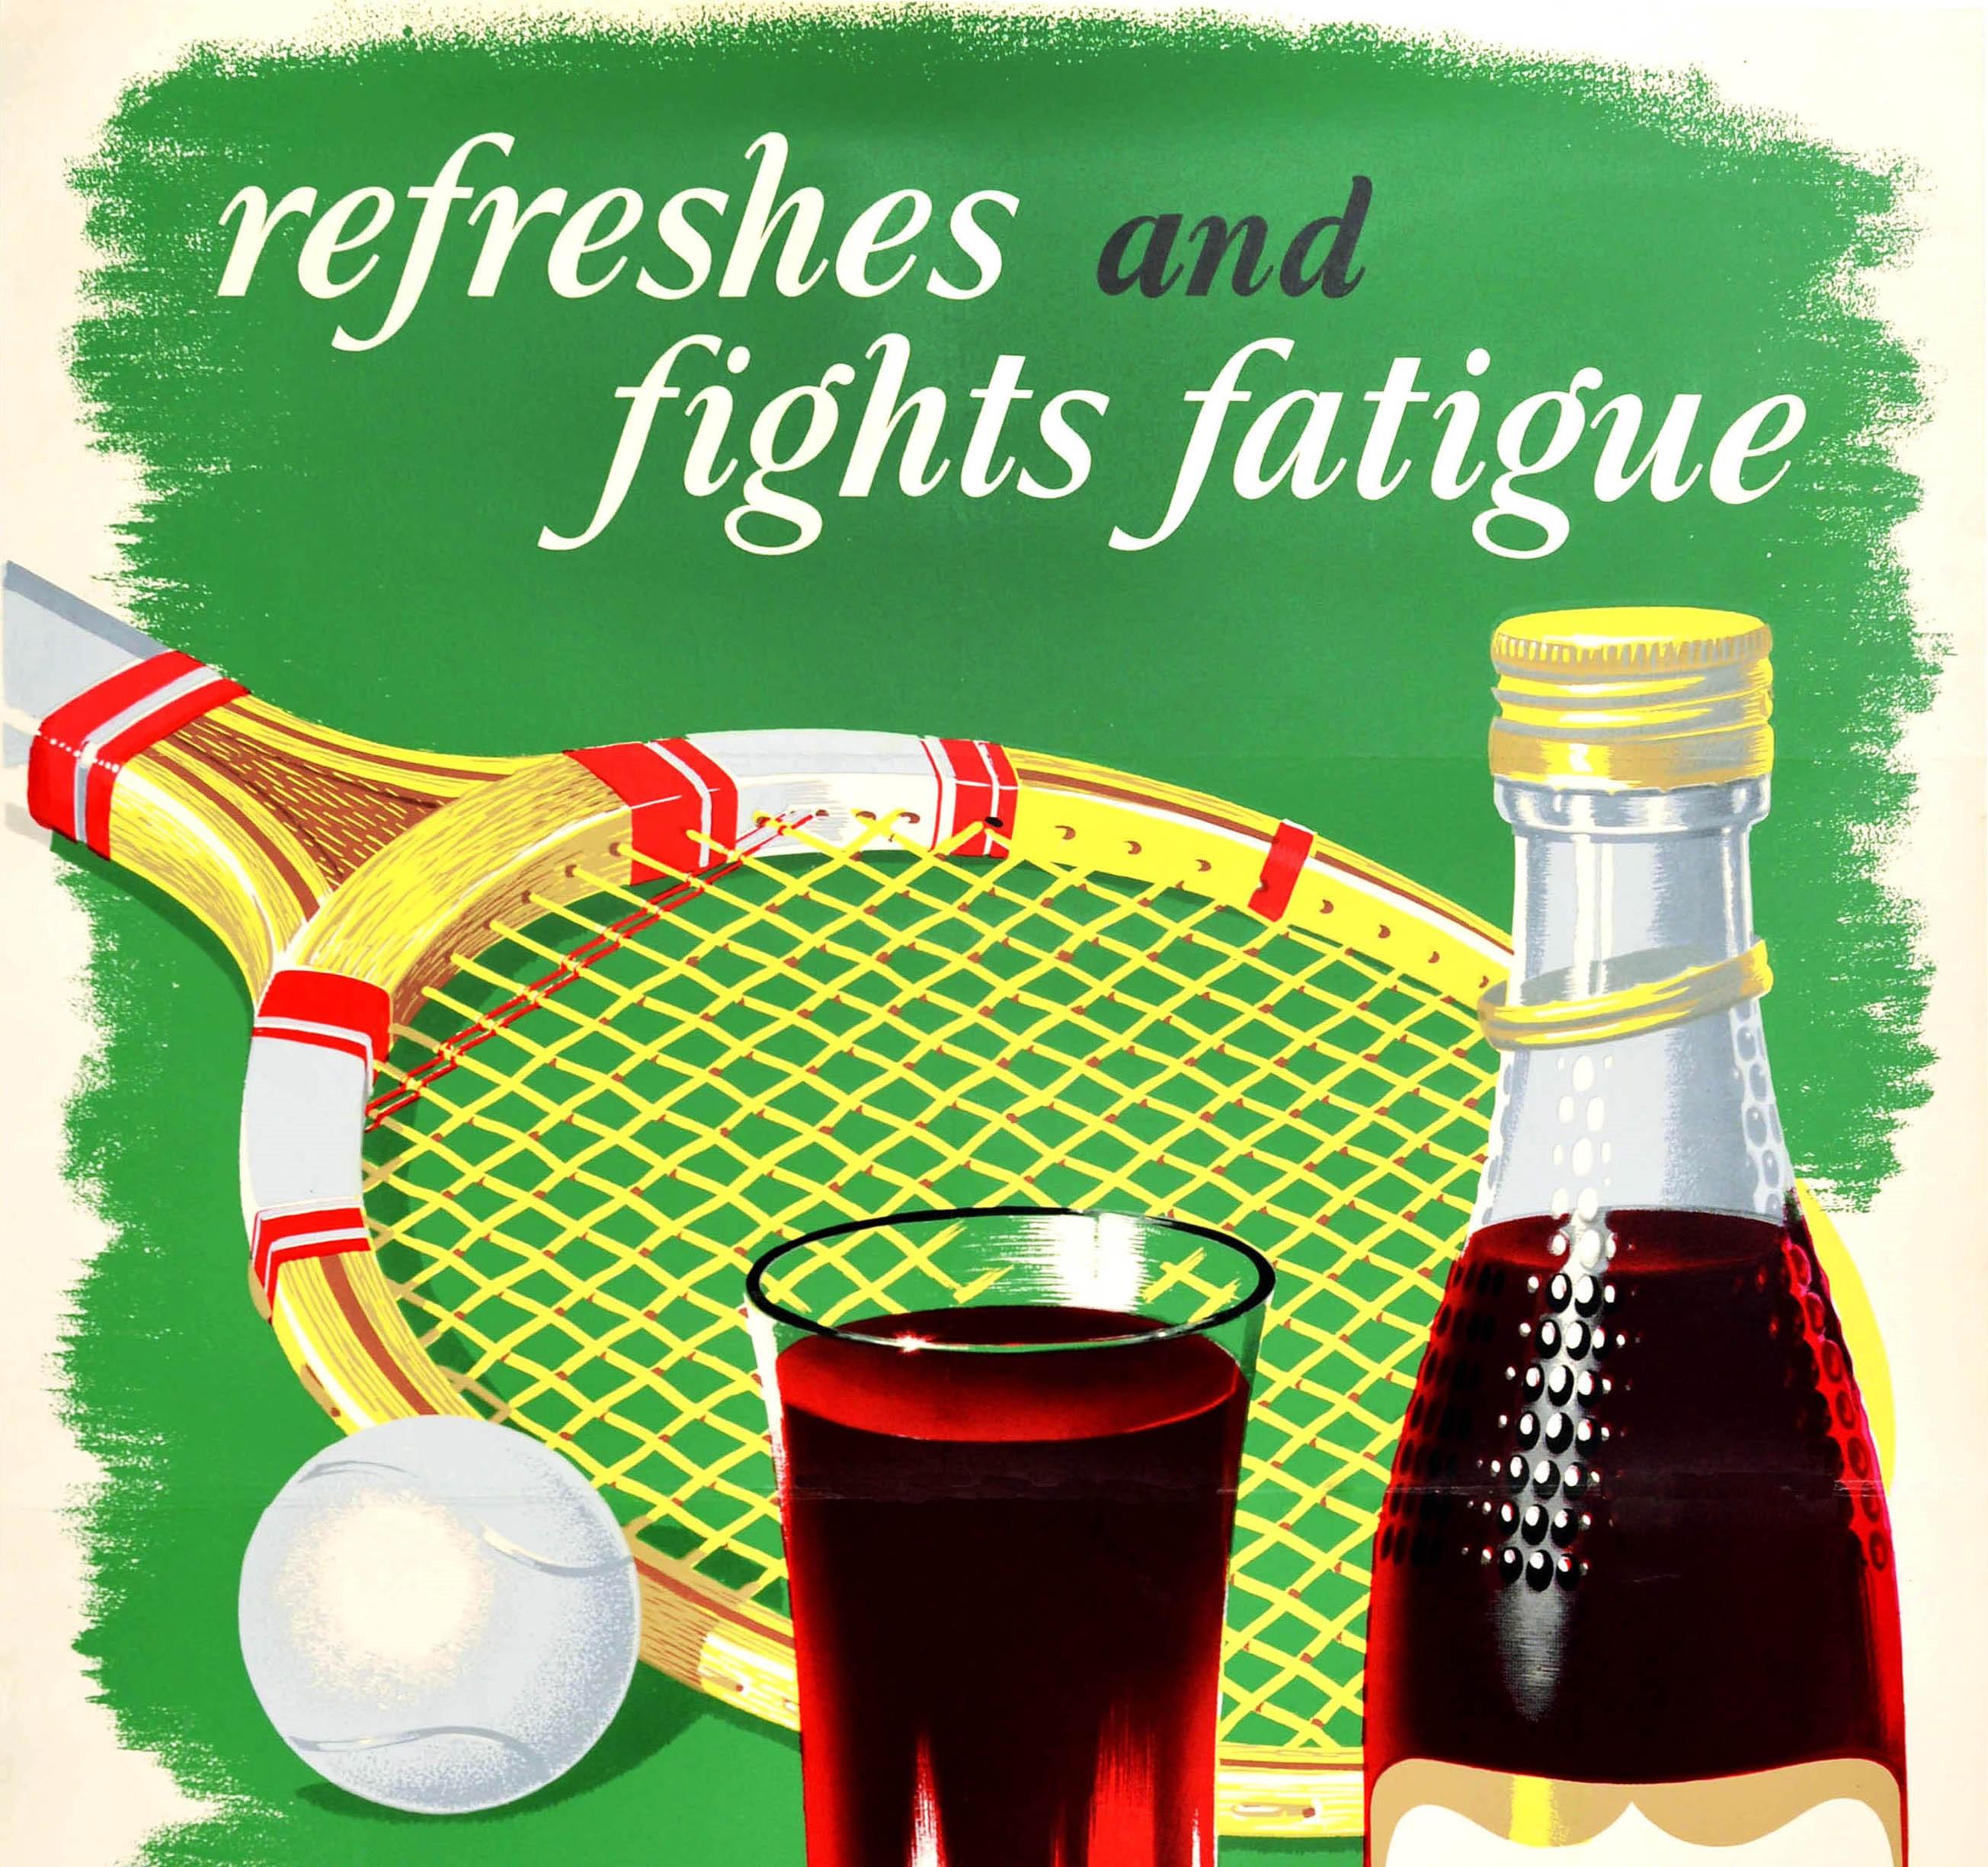 Original vintage drink advertising poster - refreshes and fights fatigue Ribena is So Delicious - featuring a wooden tennis racquet / racket and ball on the grass behind a glass of Ribena with the slogan in stylised lettering above and bold title